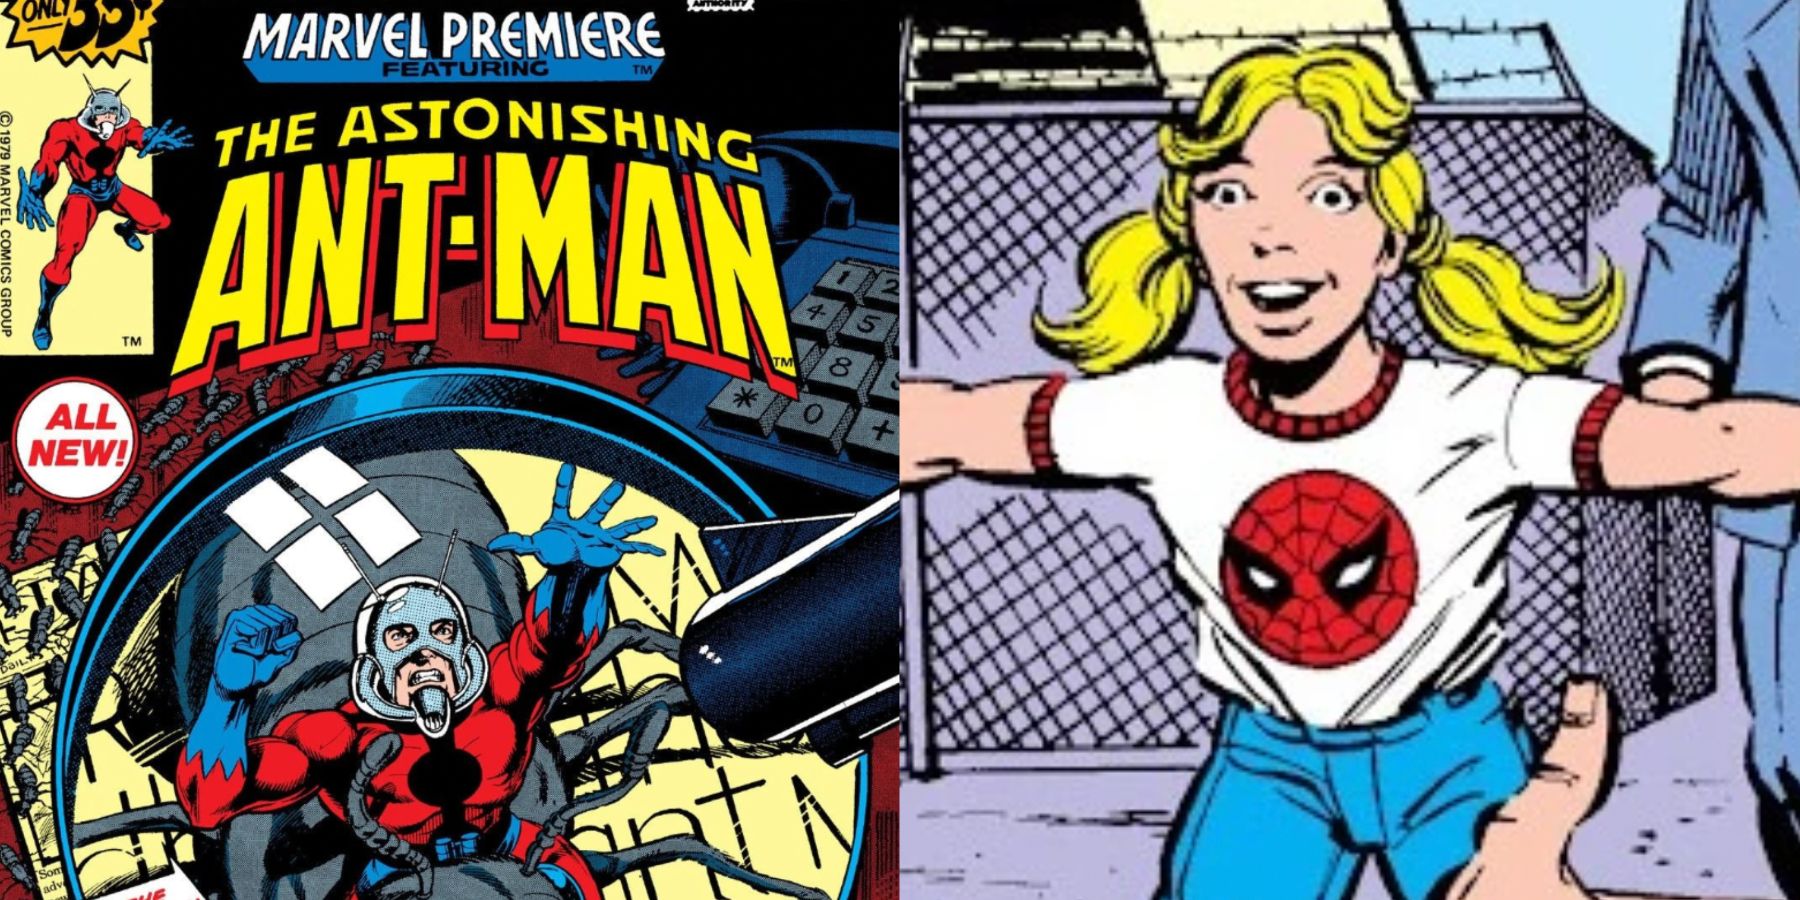 A split image feature the cover of Marvel Premiere to debut Ant-Man alongside the first appearance of Cassie Lang